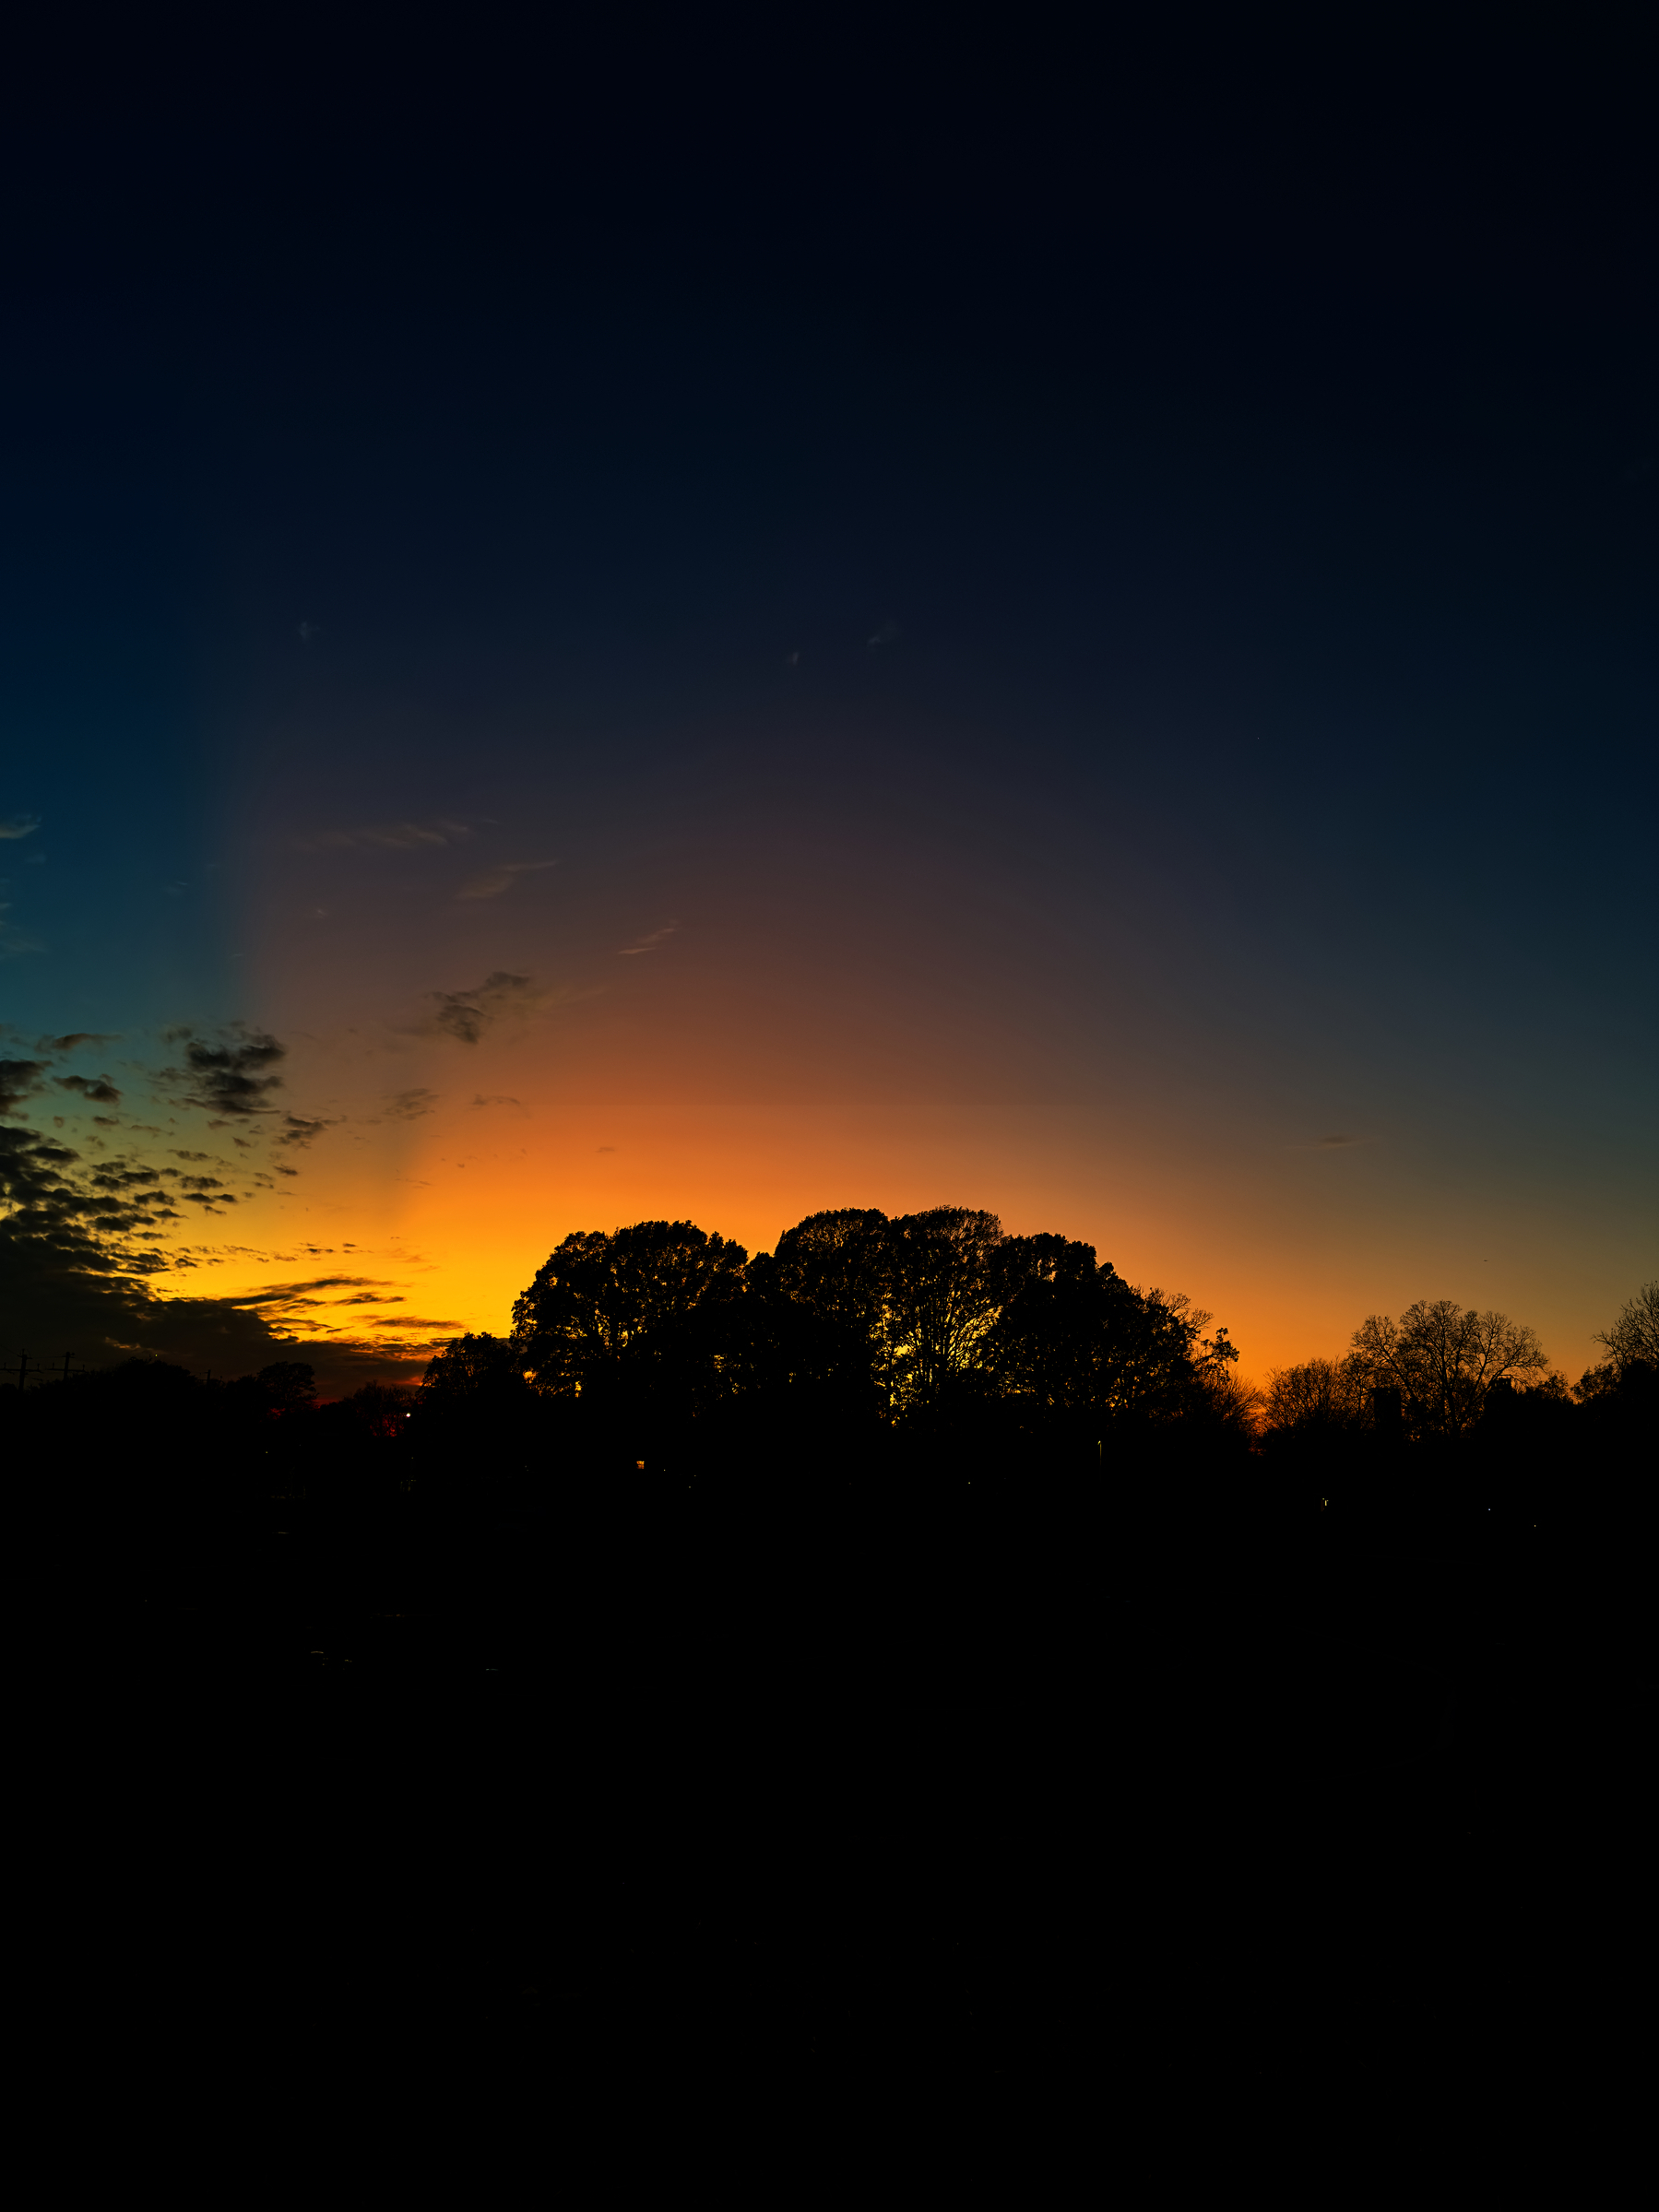 A silhouette of trees with afterglow sky in the background. 